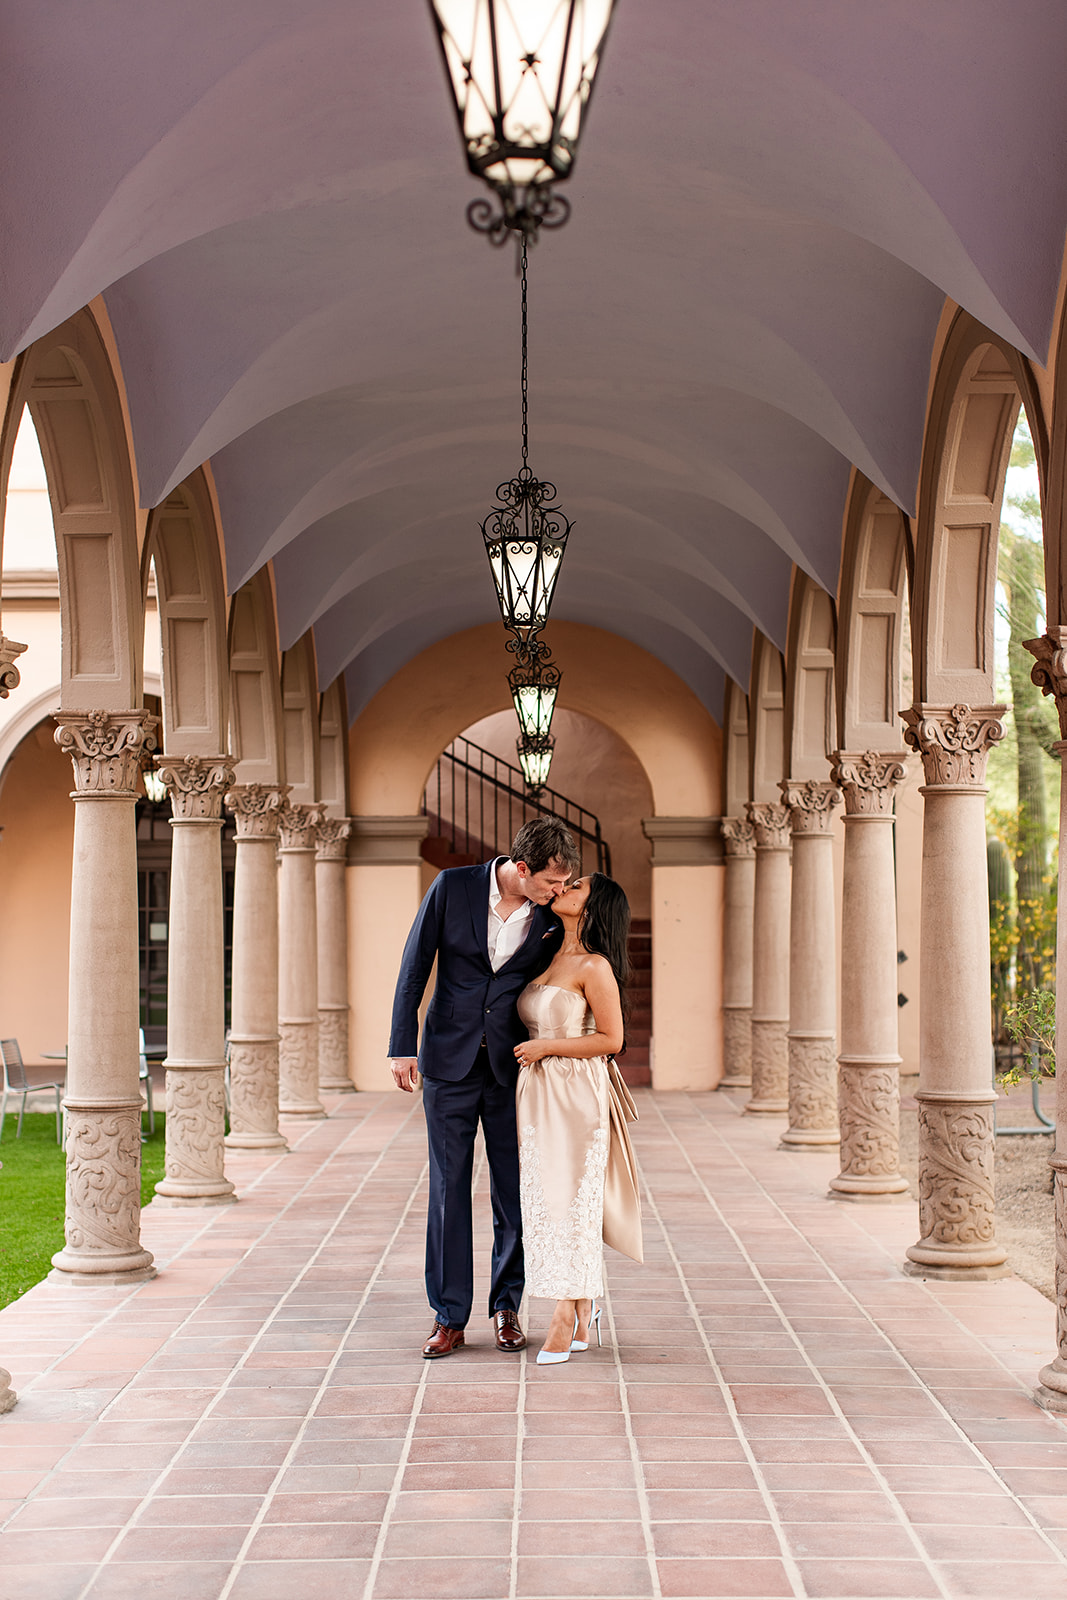 pima county courthouse elopement in covered archway